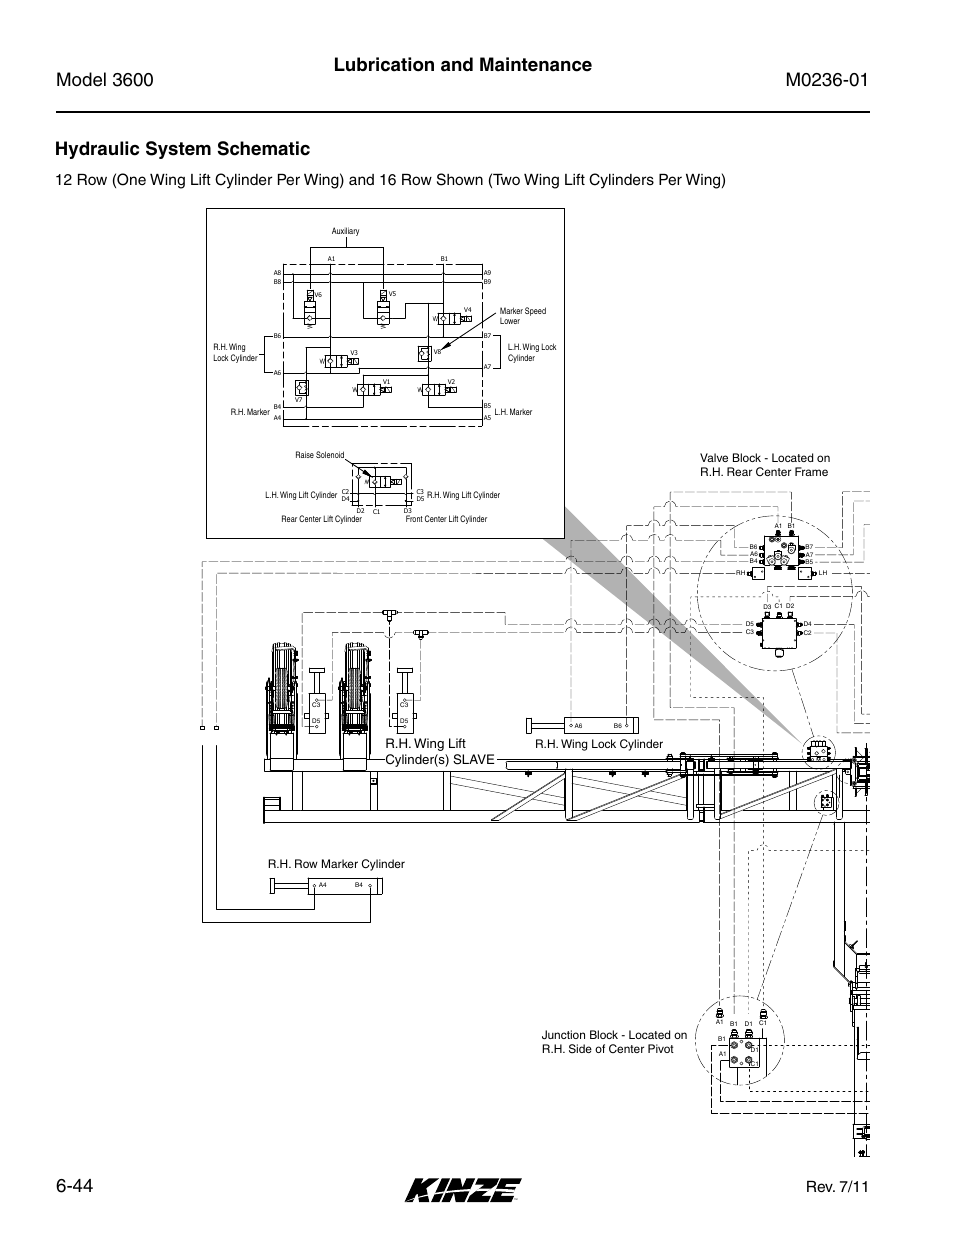 Lubrication and maintenance, Hydraulic system schematic, Rev. 7/11 | L.h. row marker cylinder, R.h. wing lift cylinder(s) slave | Kinze 3600 Lift and Rotate Planter Rev. 7/14 User Manual | Page 152 / 172